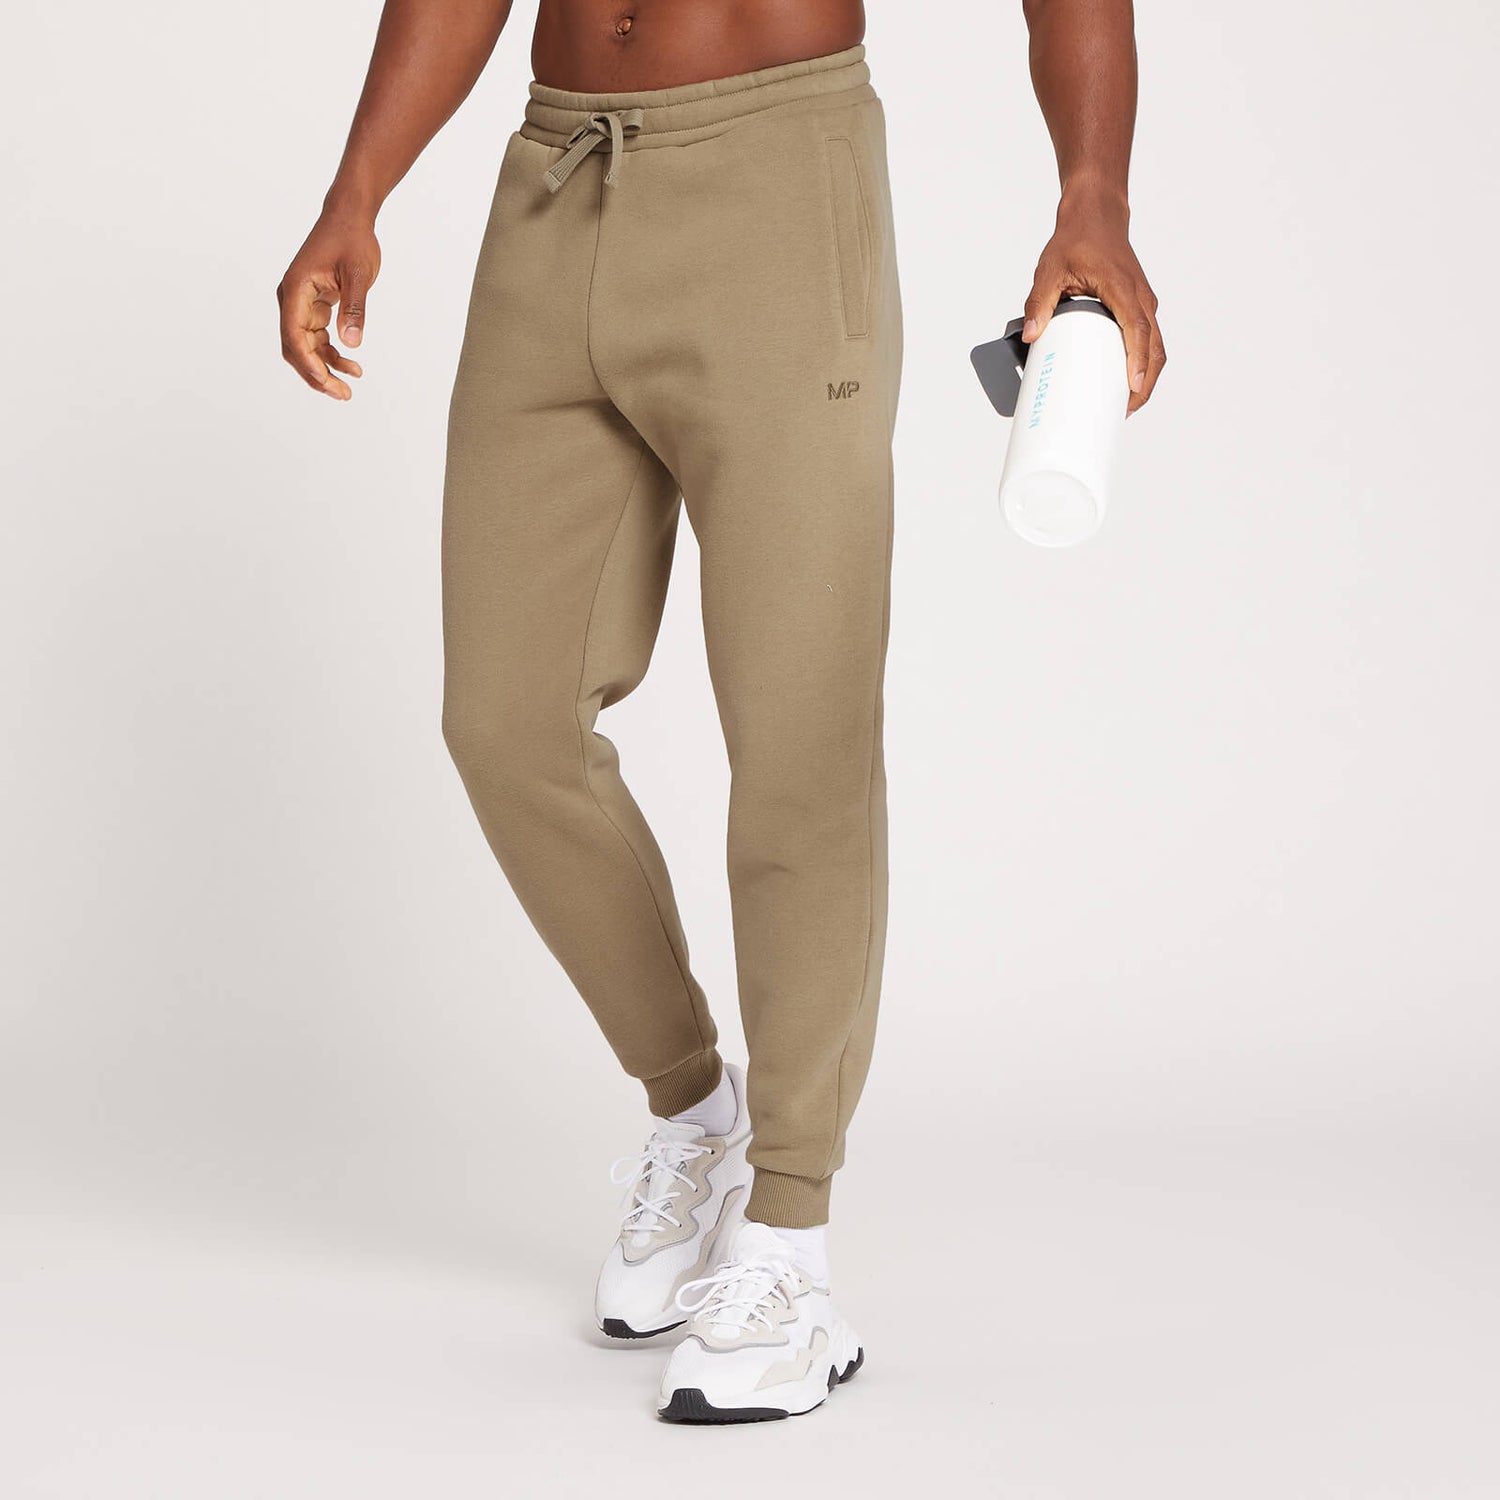 MP Men's Repeat MP Graphic Joggers - Taupe